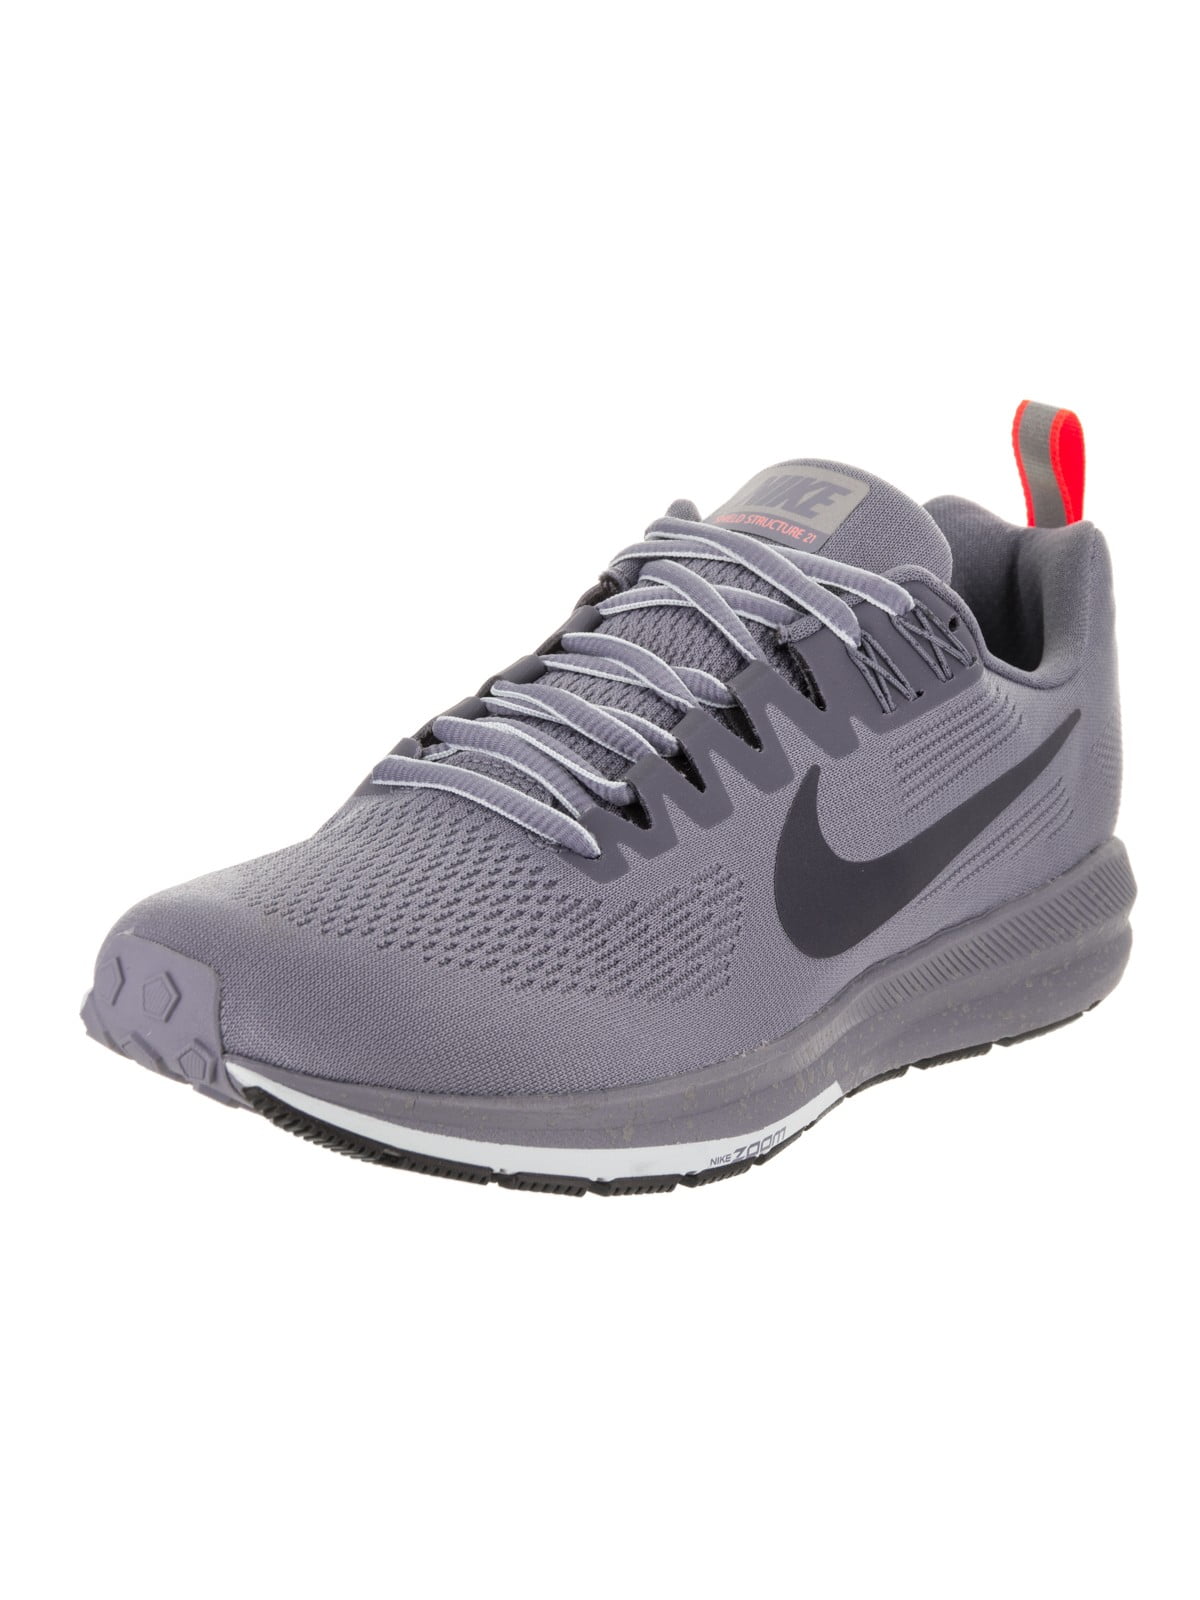 Nike Women's Air Zoom Structure 21 